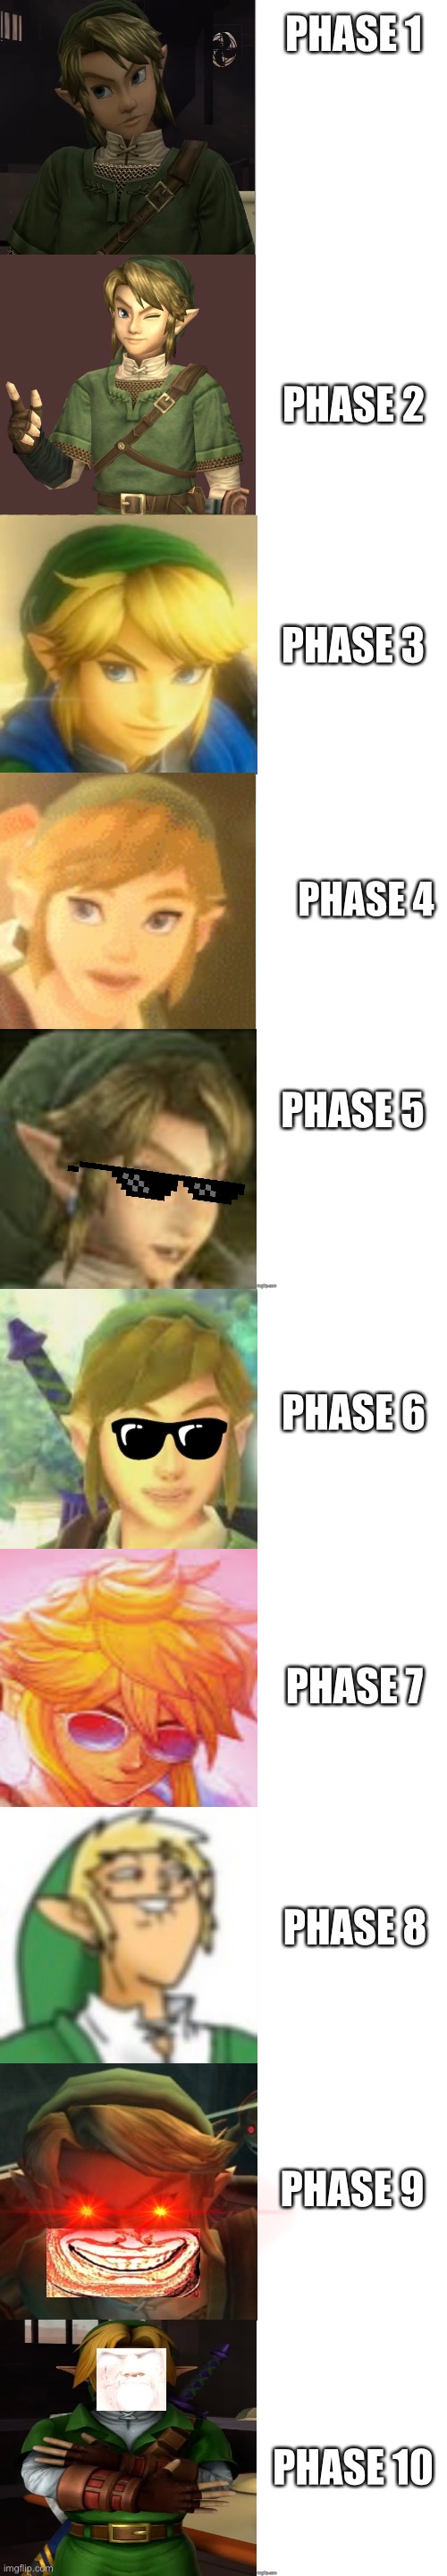 Mr incredible becoming canny but it’s Link (Link becoming canny) | PHASE 1; PHASE 2; PHASE 3; PHASE 4; PHASE 5; PHASE 6; PHASE 7; PHASE 8; PHASE 9; PHASE 10 | image tagged in mr incredible becoming canny,link,memes,funny memes,funny,legend of zelda | made w/ Imgflip meme maker